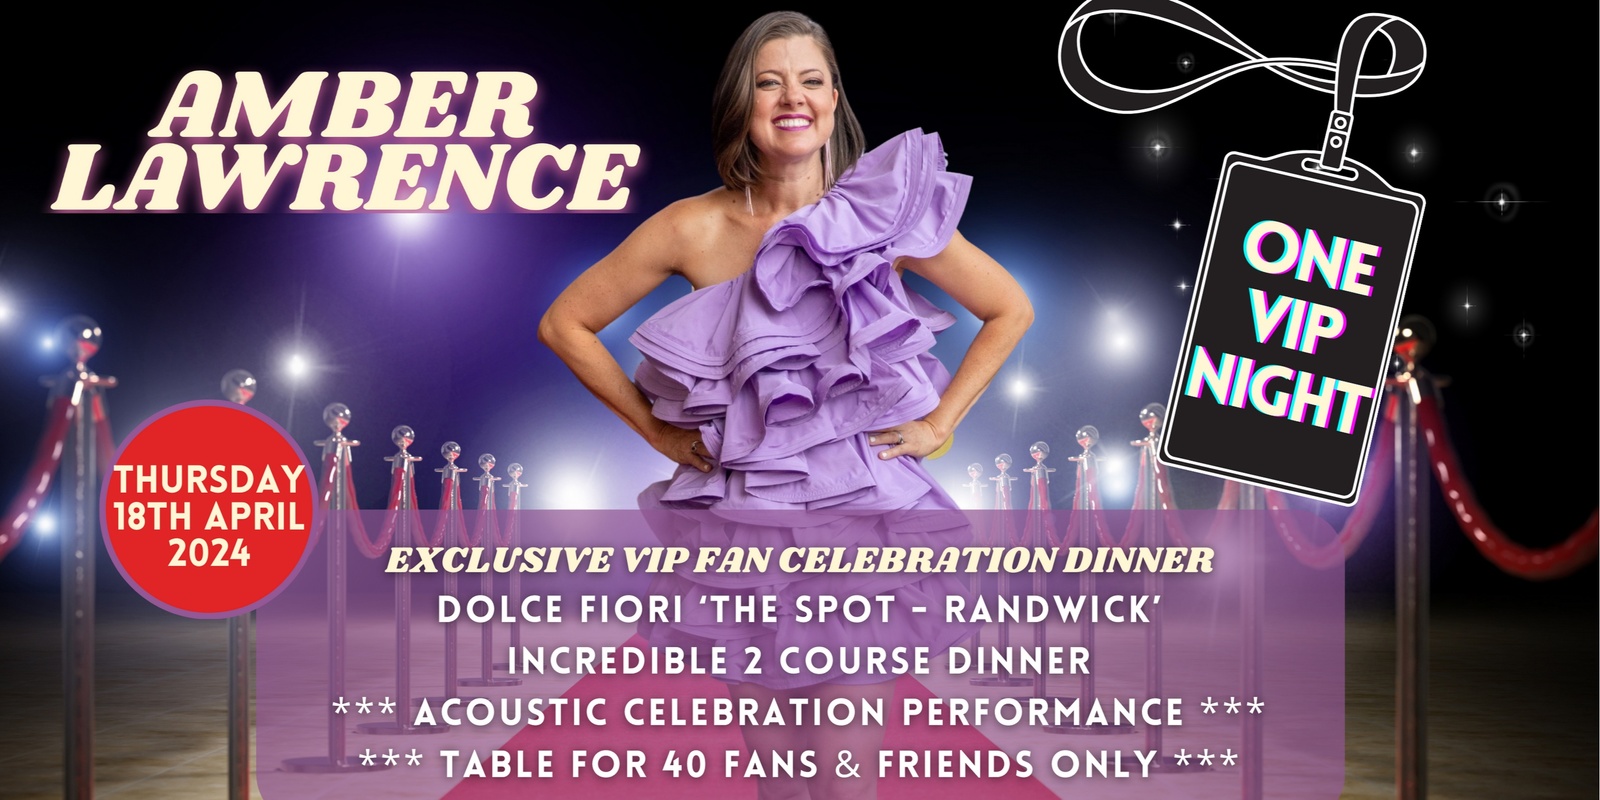 Banner image for One VIP Night 2024 - an exclusive event dinner with Amber, and it's her birthday!